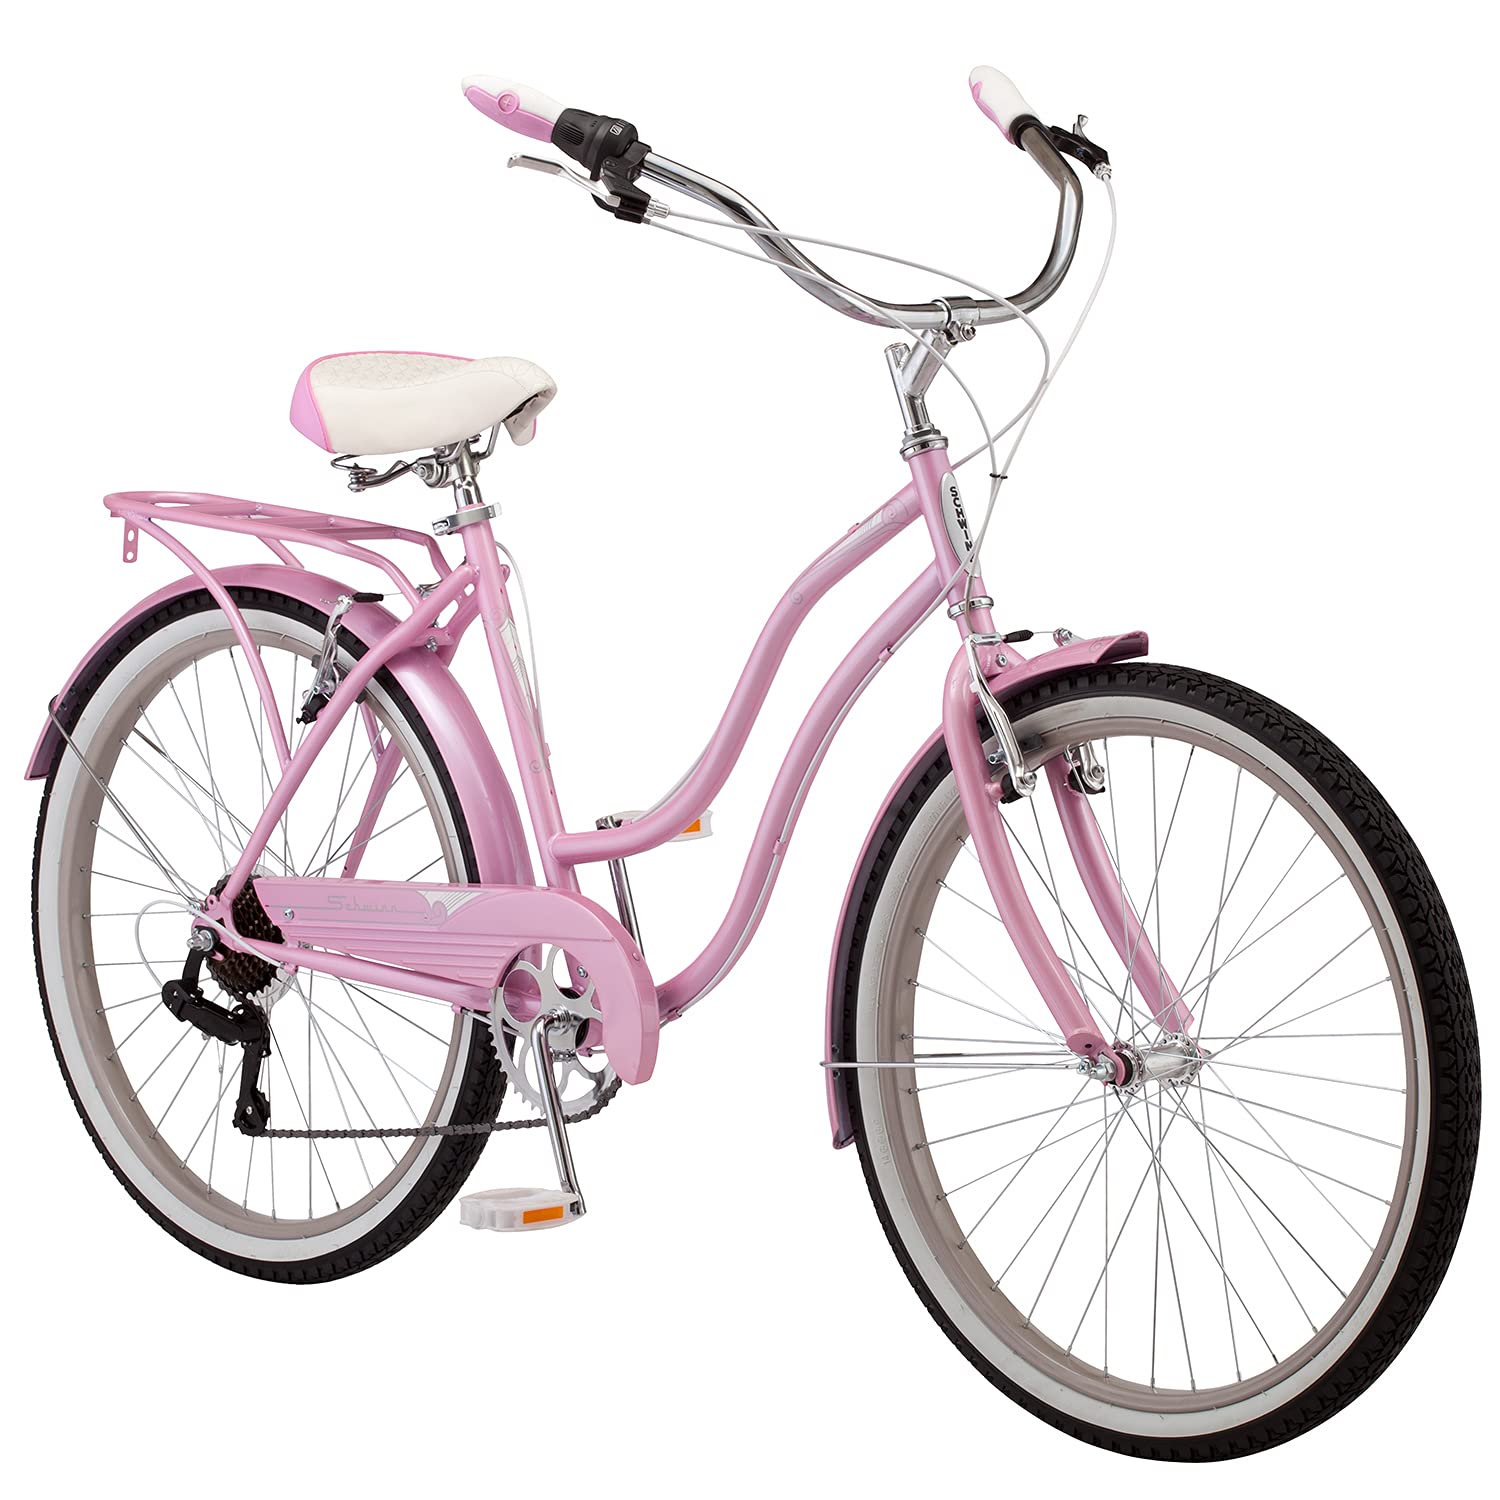 Schwinn Perla Women39s Cruiser Bicycle Featuring 18-Inch Step-Through Steel Frame and 7-Speed Drivetrain with Front and R